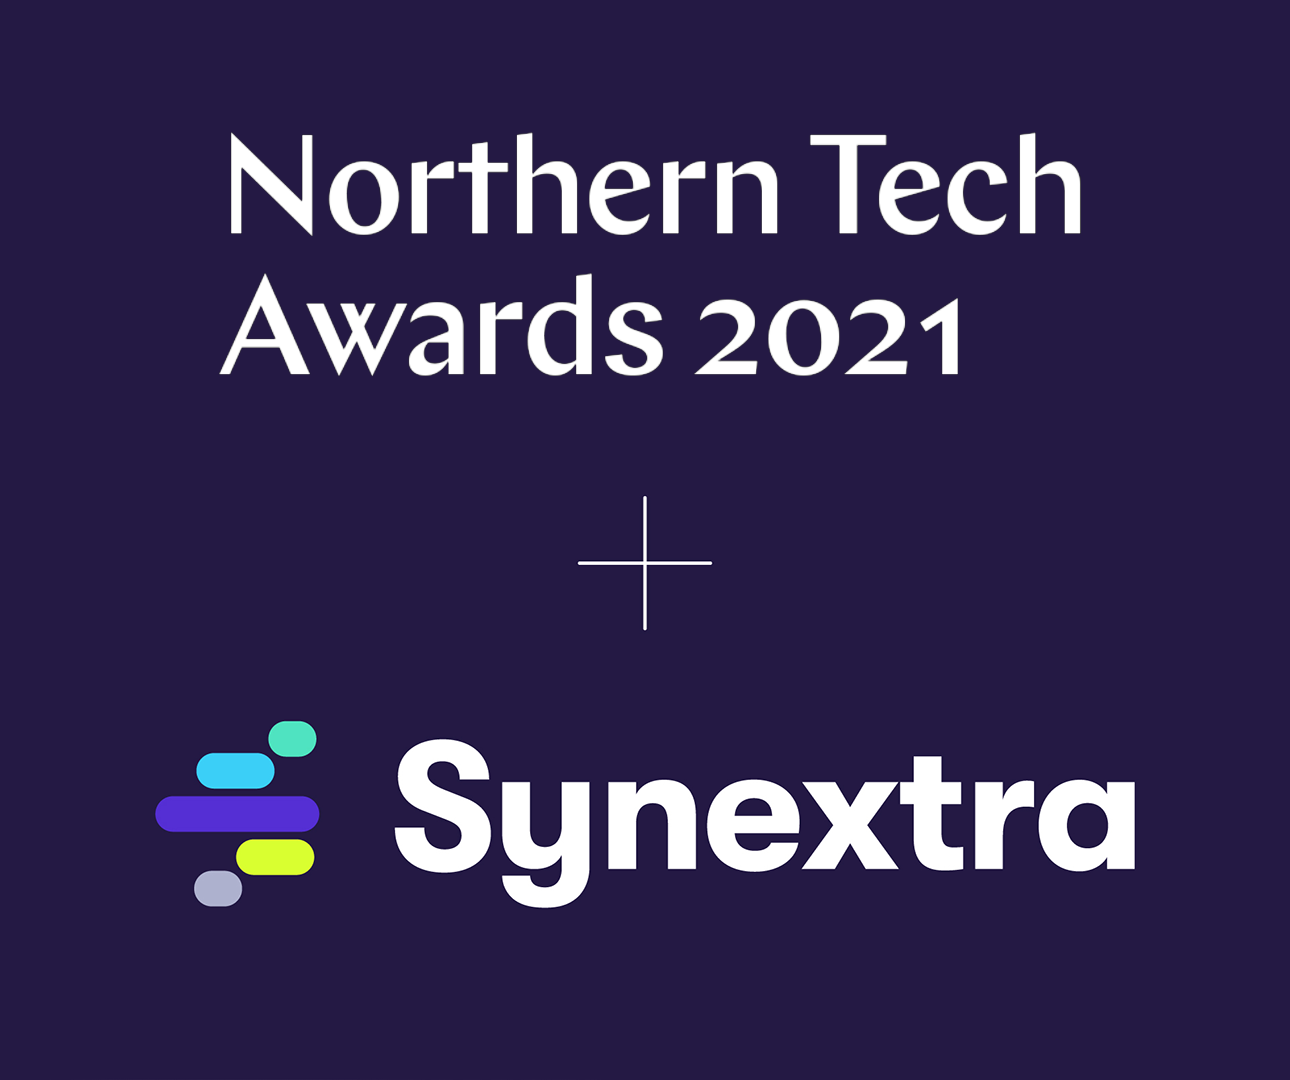 We’ve made the 2021 Northern Tech Awards Top 100 shortlist!